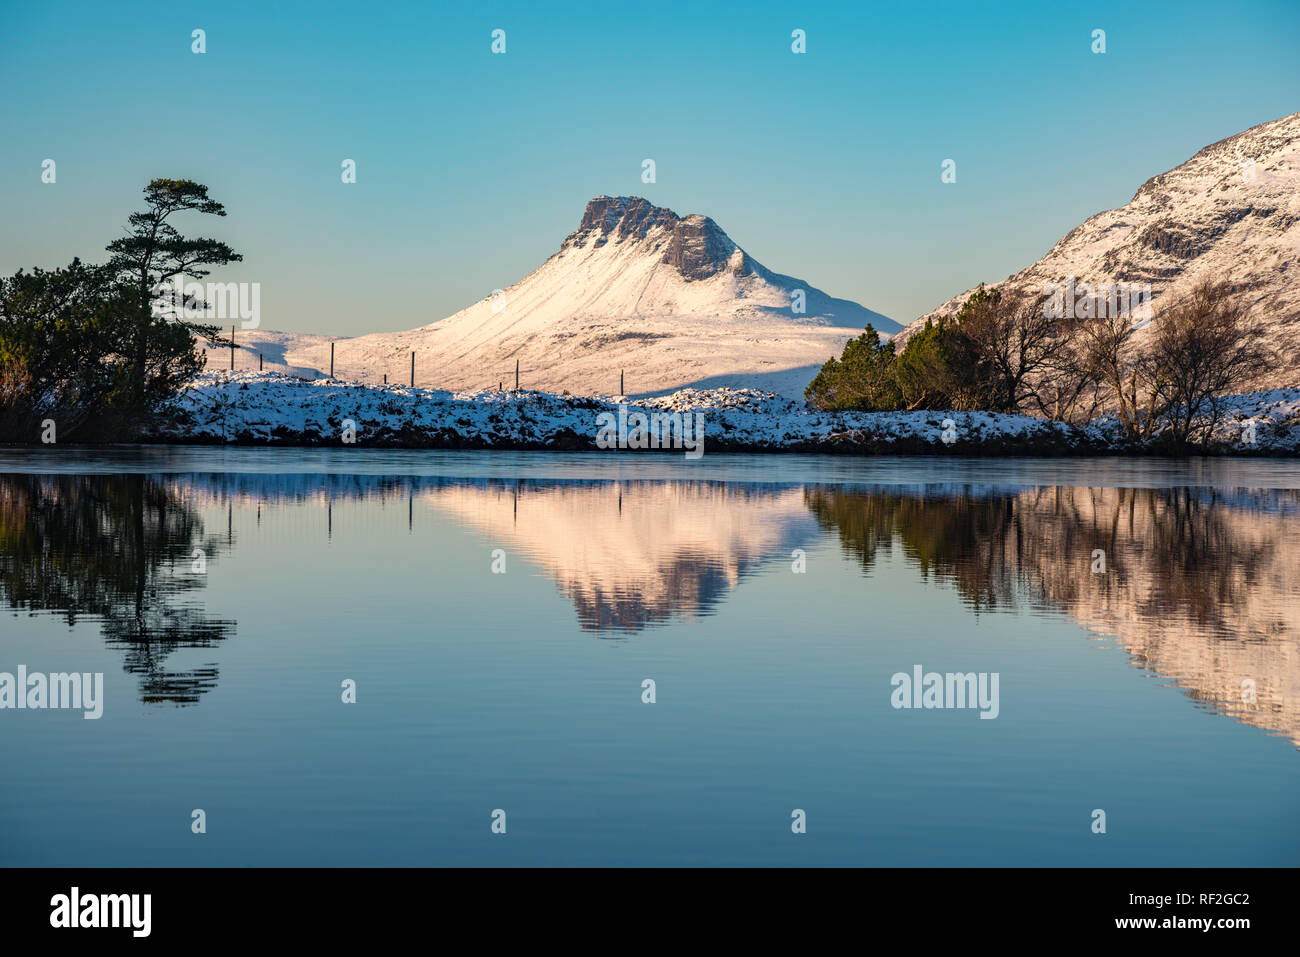 Reflection of Stac Pollaidh in winter covered in snow, Inverpolly, Assynt, Wester Ross, Scottish Highlands, Scotland, UK, Europe Stock Photo